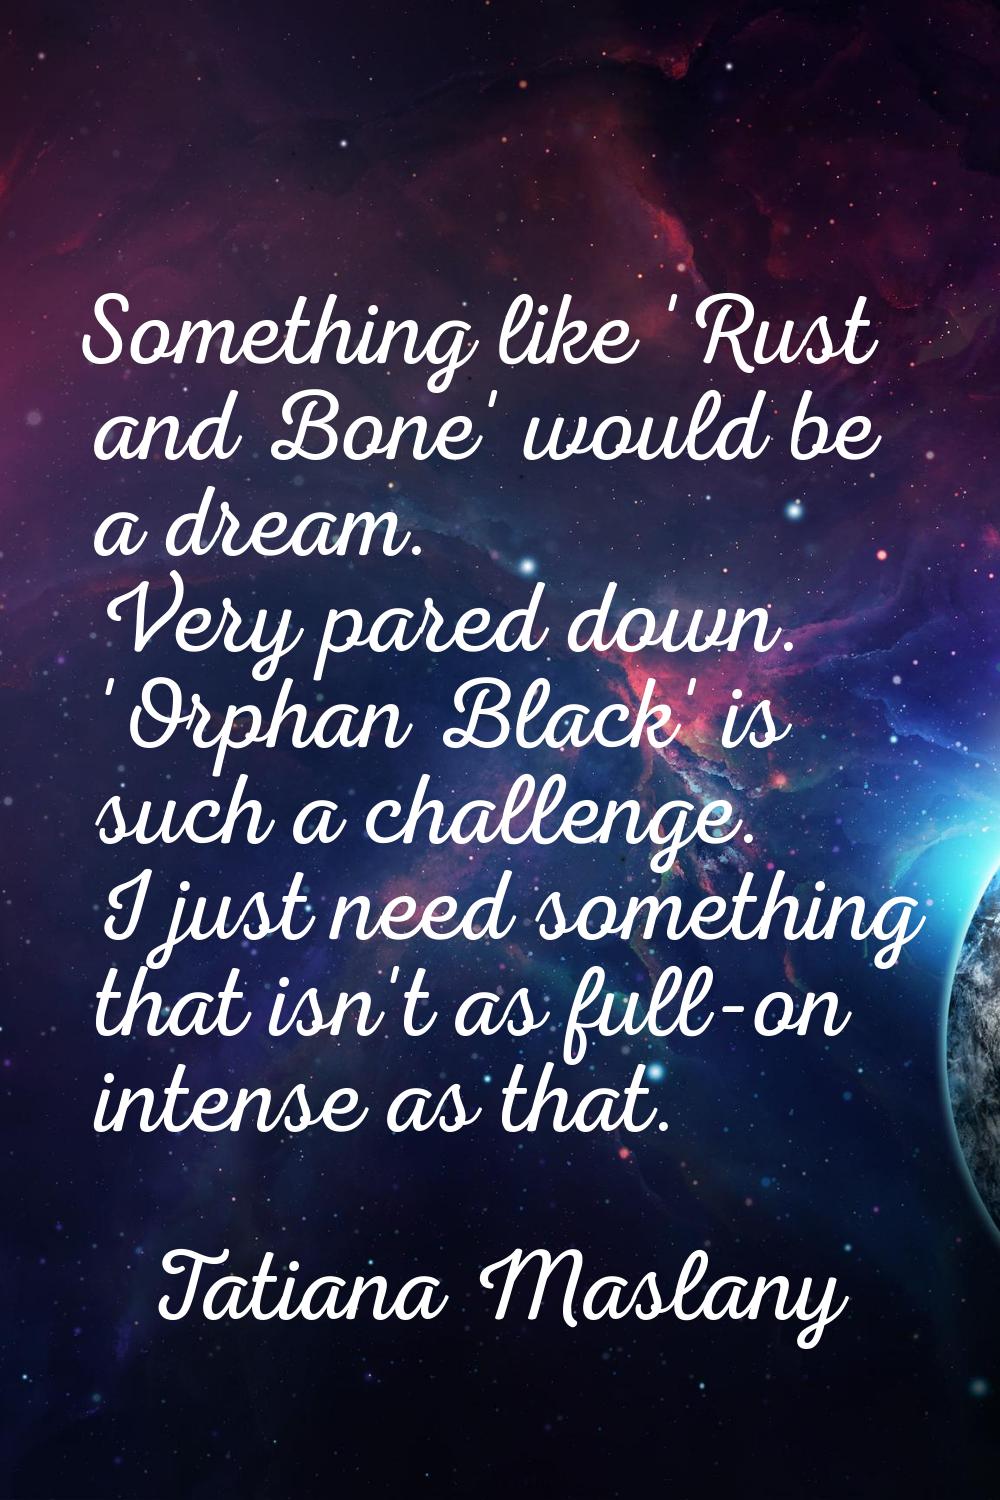 Something like 'Rust and Bone' would be a dream. Very pared down. 'Orphan Black' is such a challeng